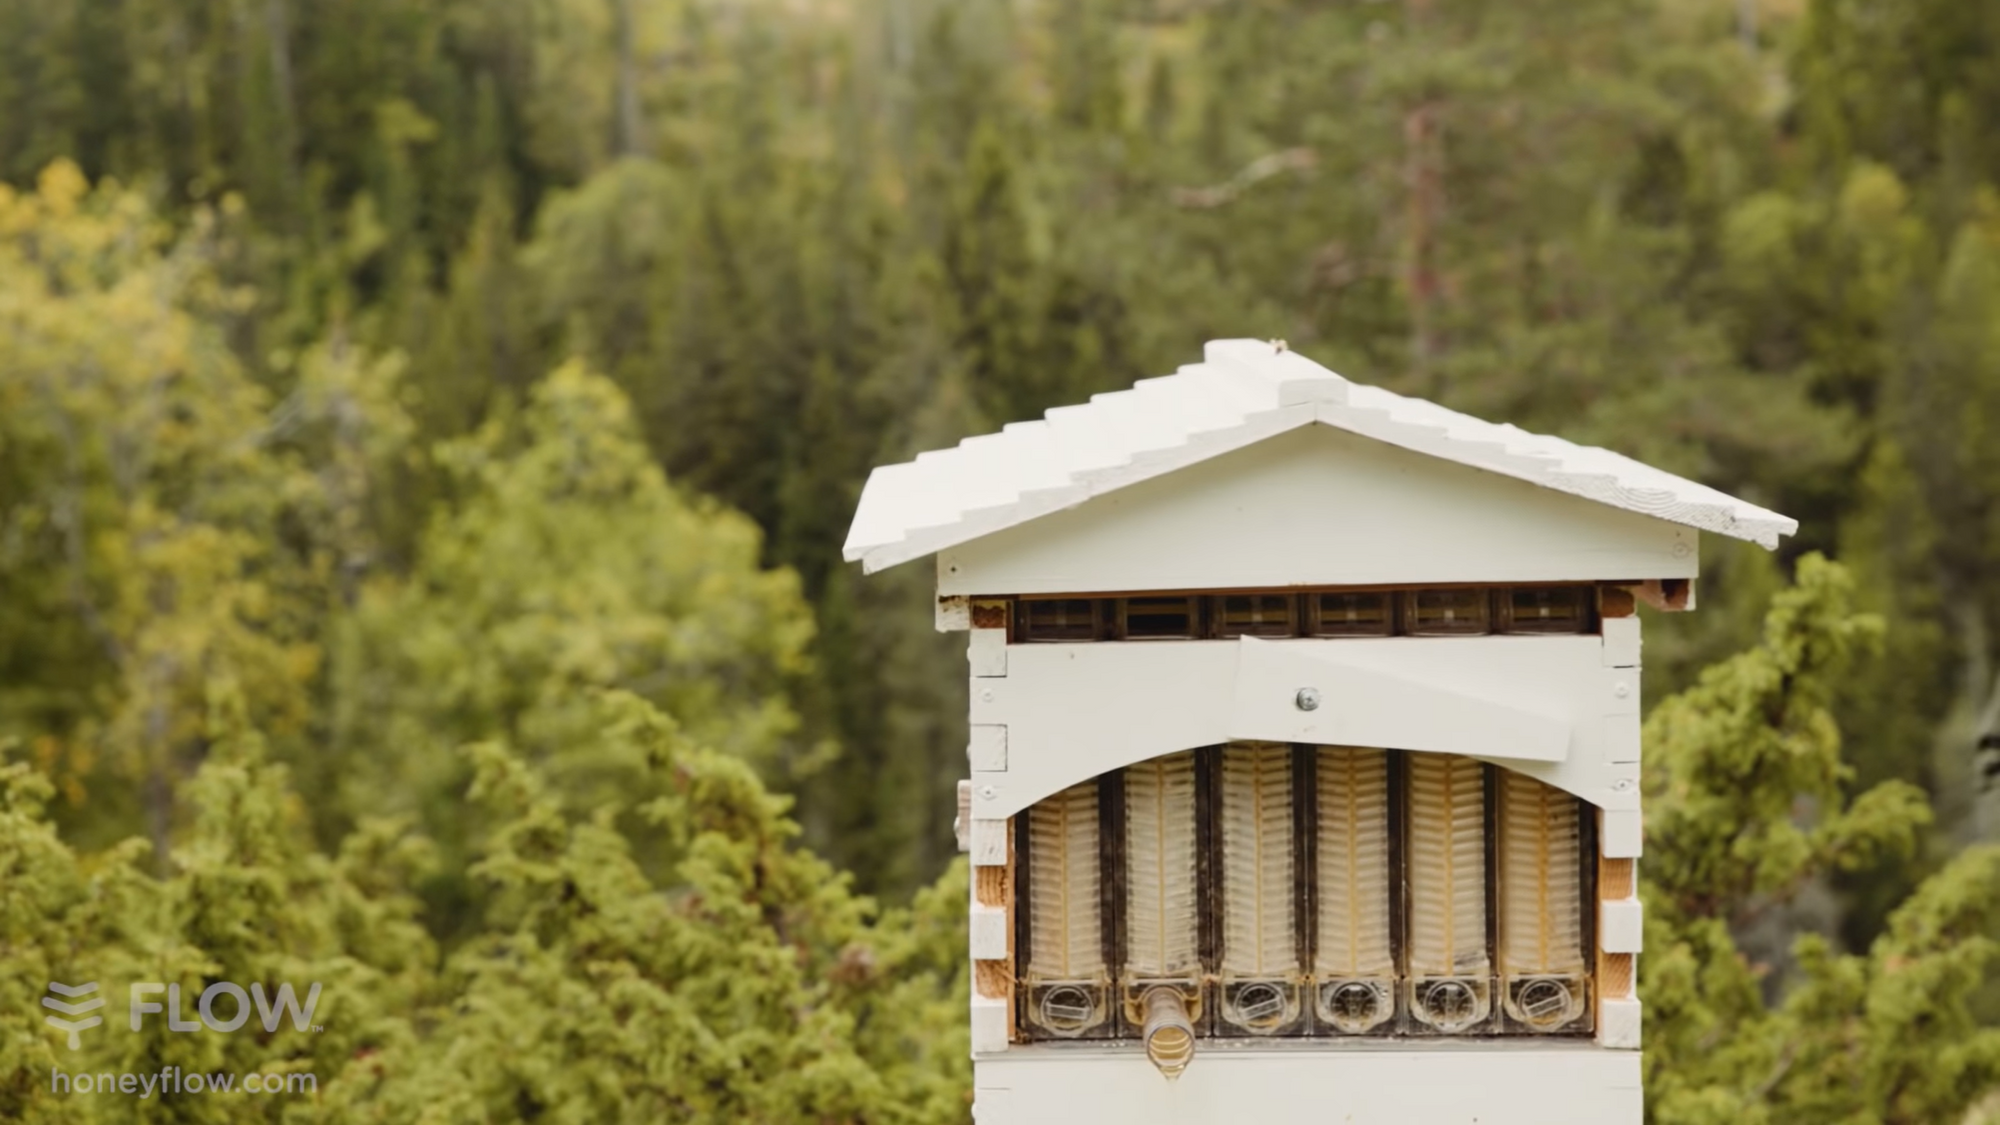 Harvesting Flow Hive honey on a mountaintop in Norway